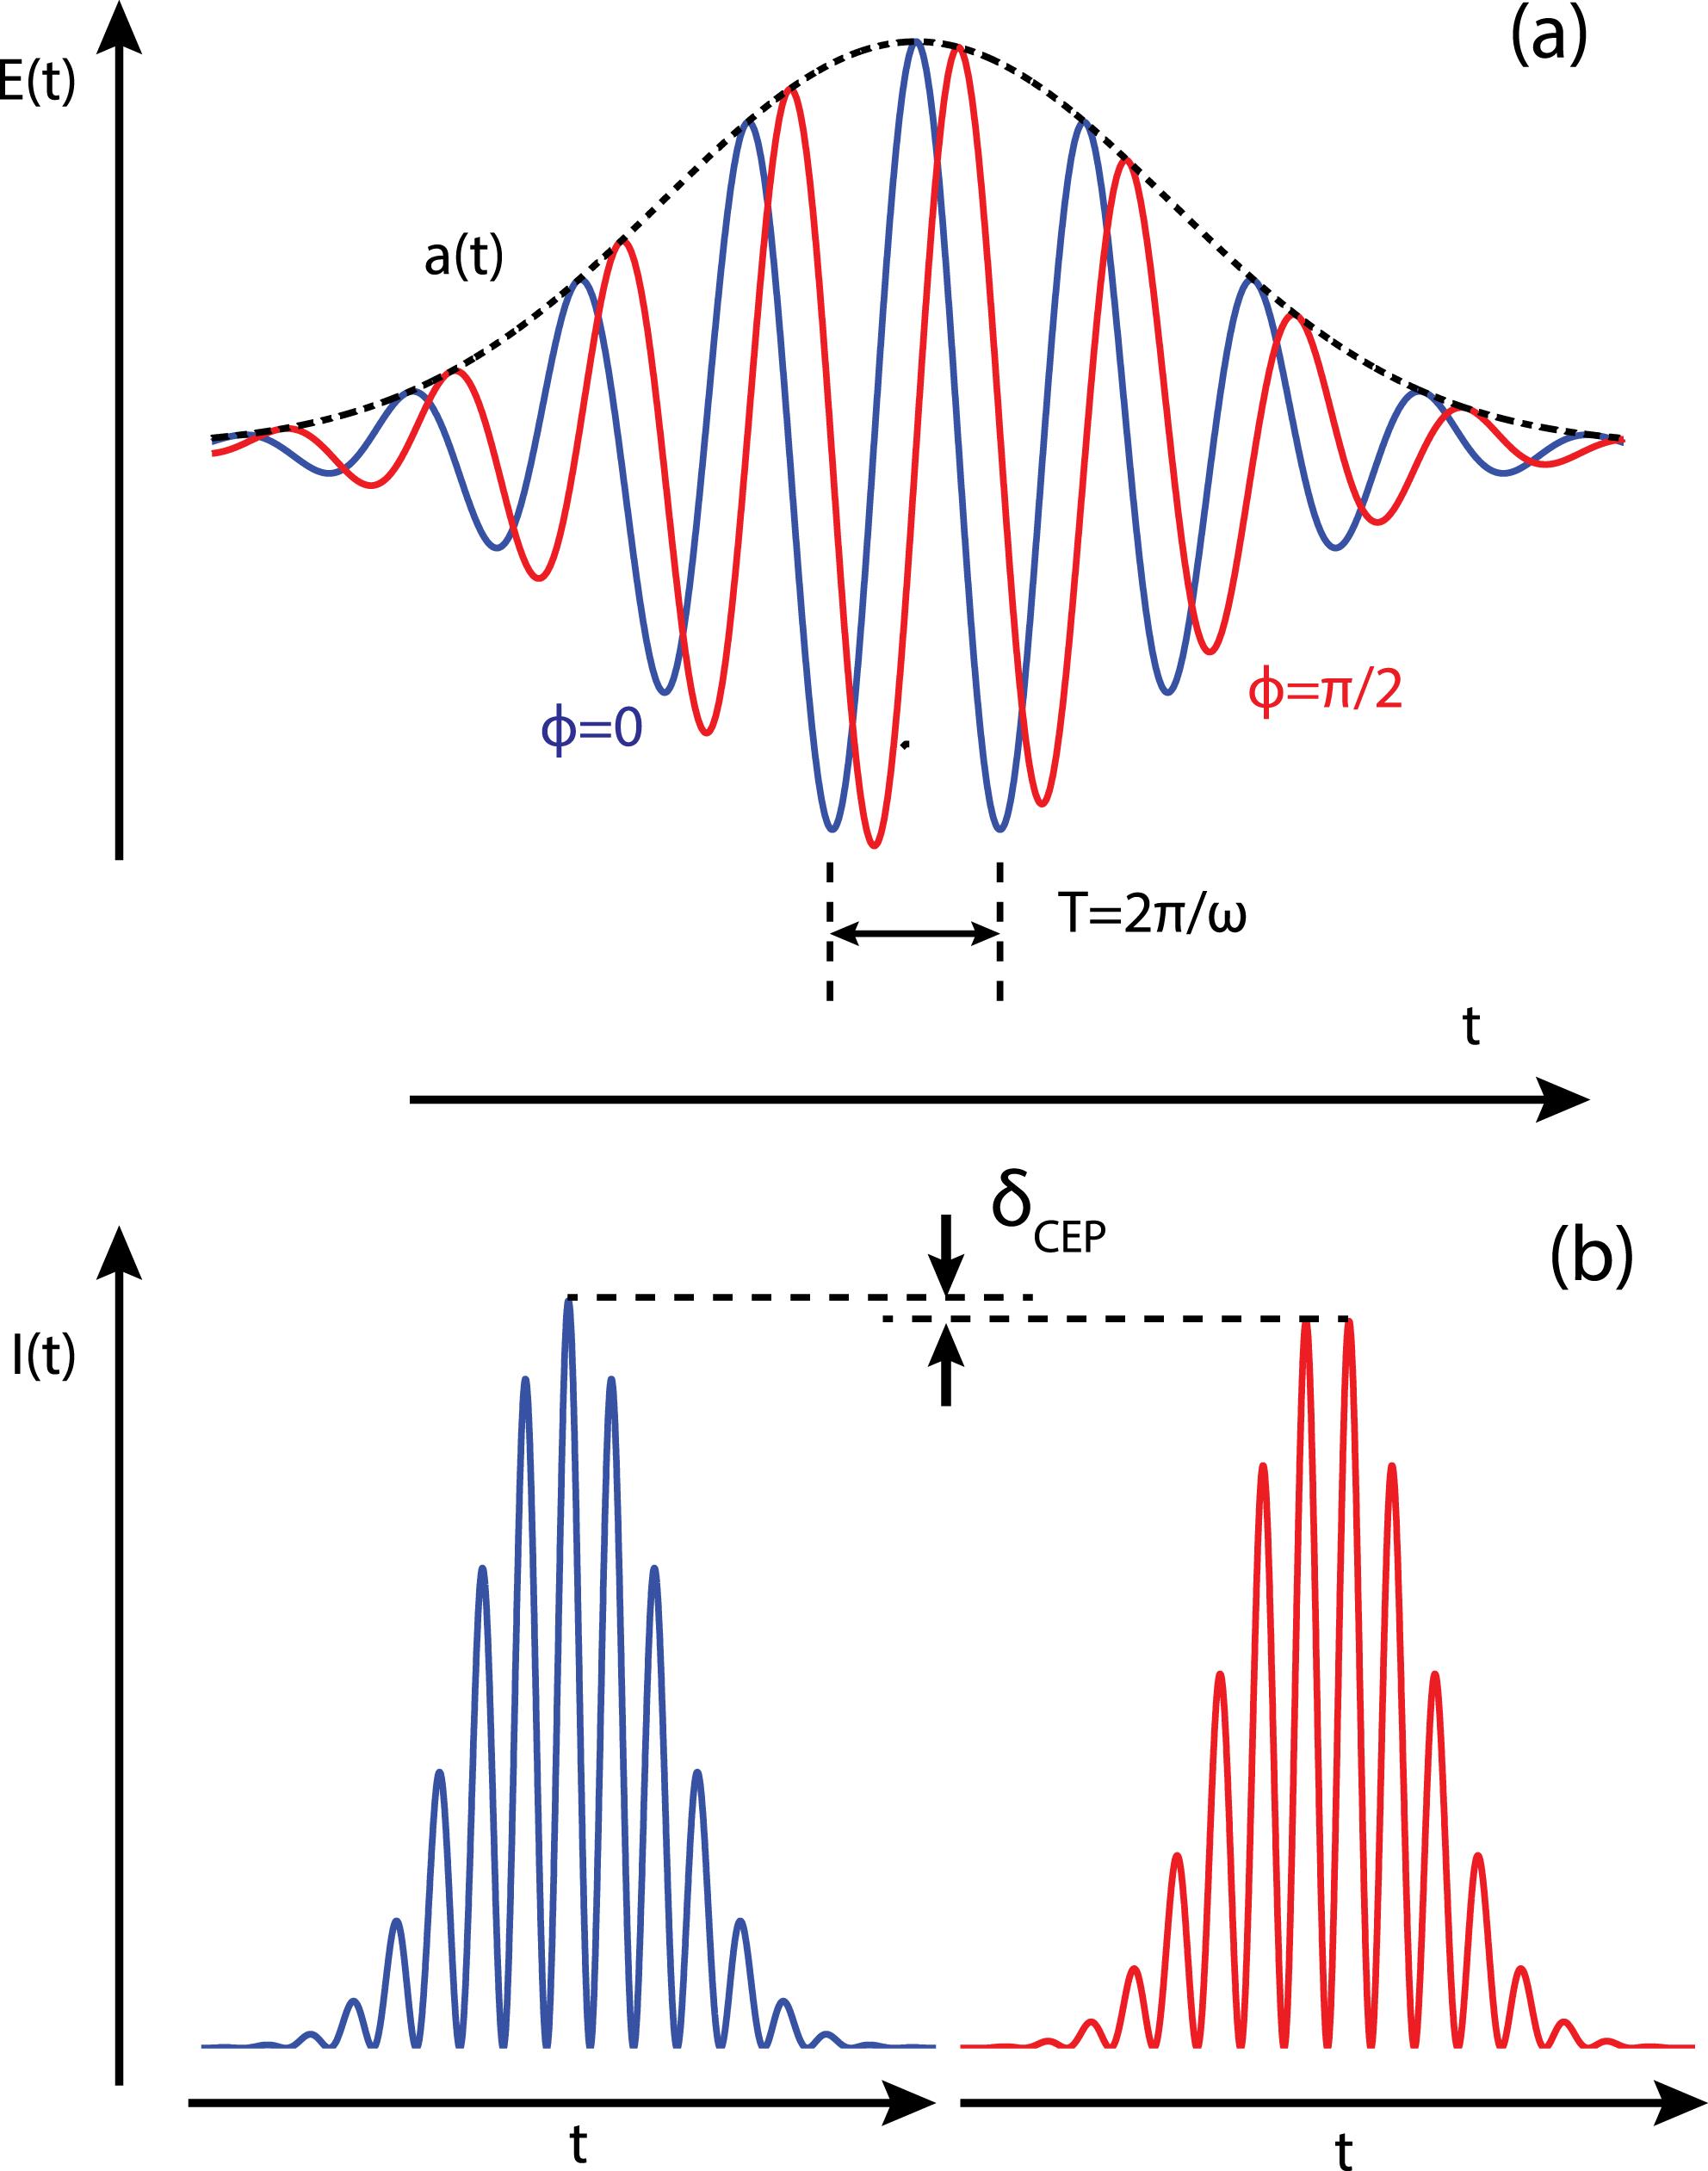 (a) Shows the effects of CEP on the electric field and the intensity of the wave. The red line is a sine waveform and the blue line is a cosine waveform. $E(t)$ is the electric field of the light, $a(t)$ is the Gaussian intensity envelope of the function, $\unicode[STIX]{x1D719}$ is the CEP as defined in Equation (3). (b) Shows the intensity $I(t)$ of the sine and cosine laser pulses. $\unicode[STIX]{x1D6FF}_{CEP}$ is defined as being the difference in peak intensity between the two waveforms, as shown.